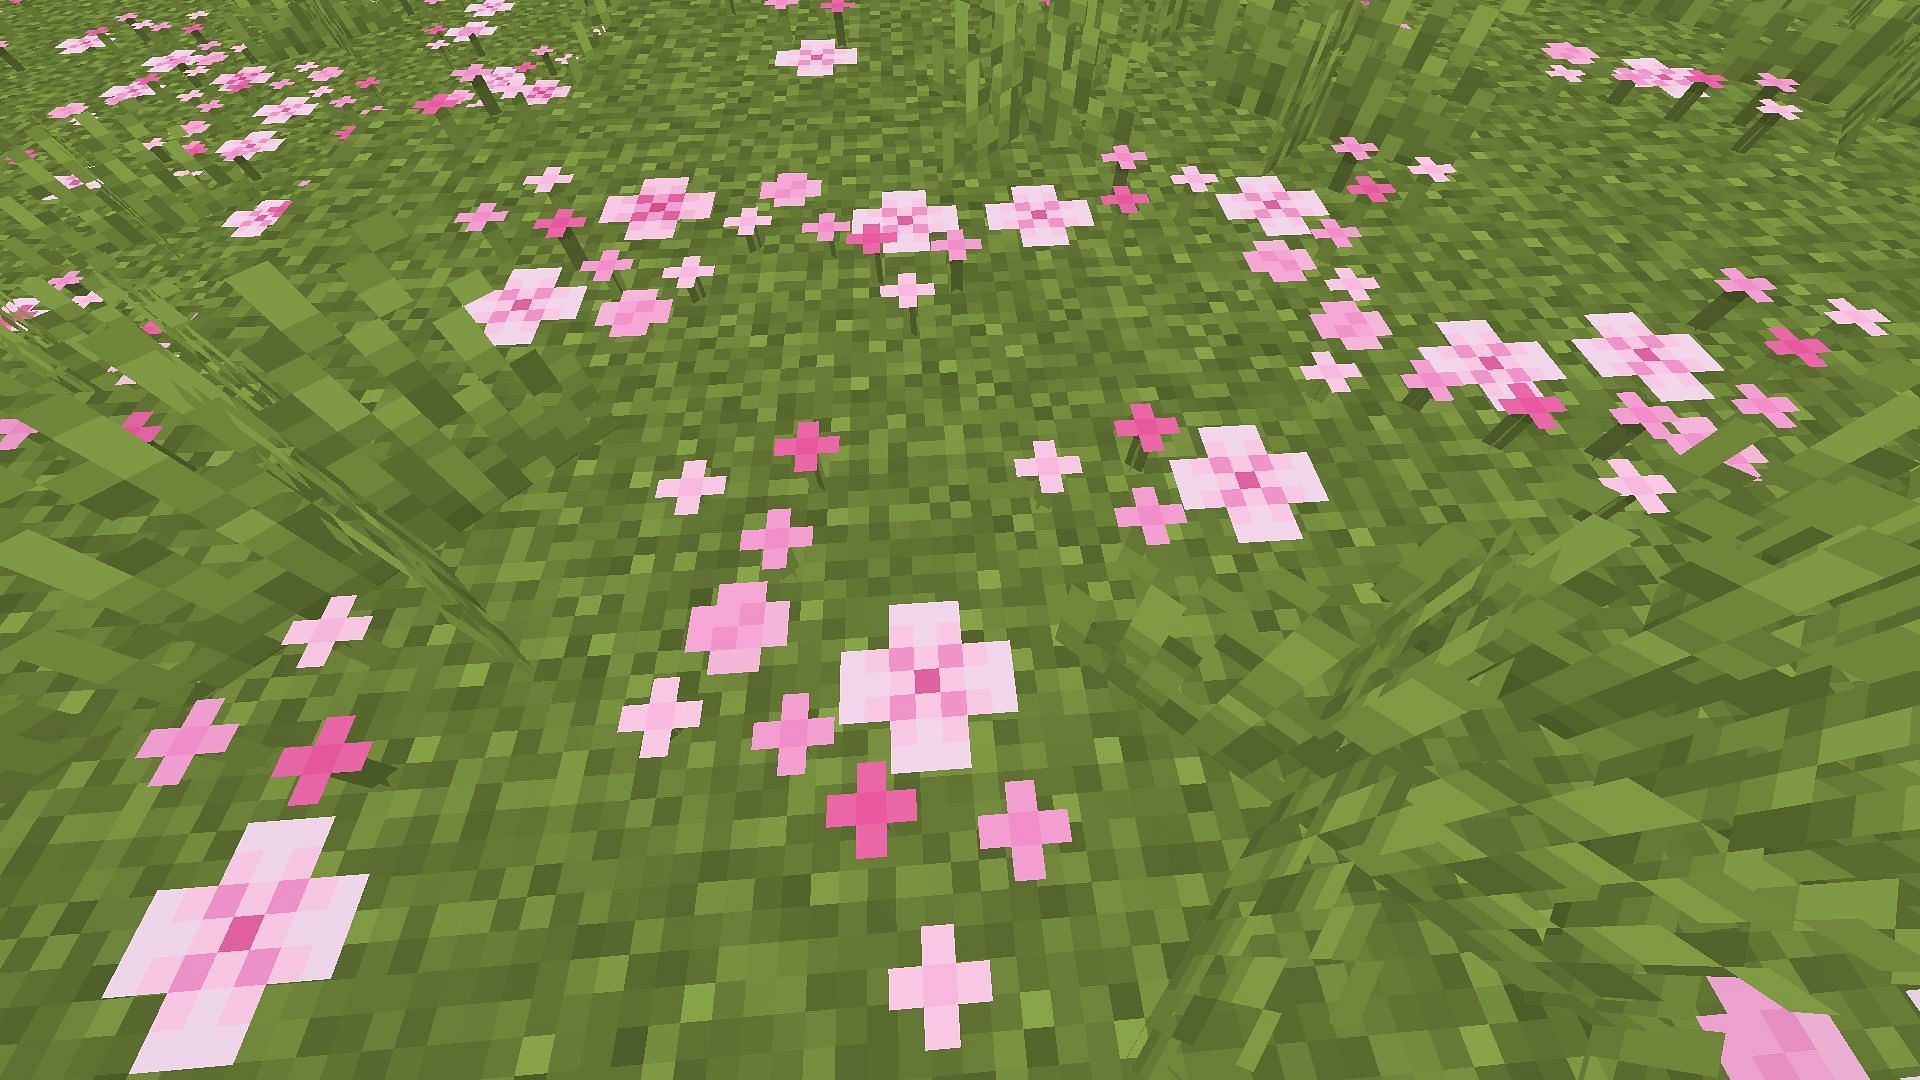 Pink petals are special blocks found on the ground in a Cherry Grove biome in the Minecraft 1.20 update (Image via Mojang)